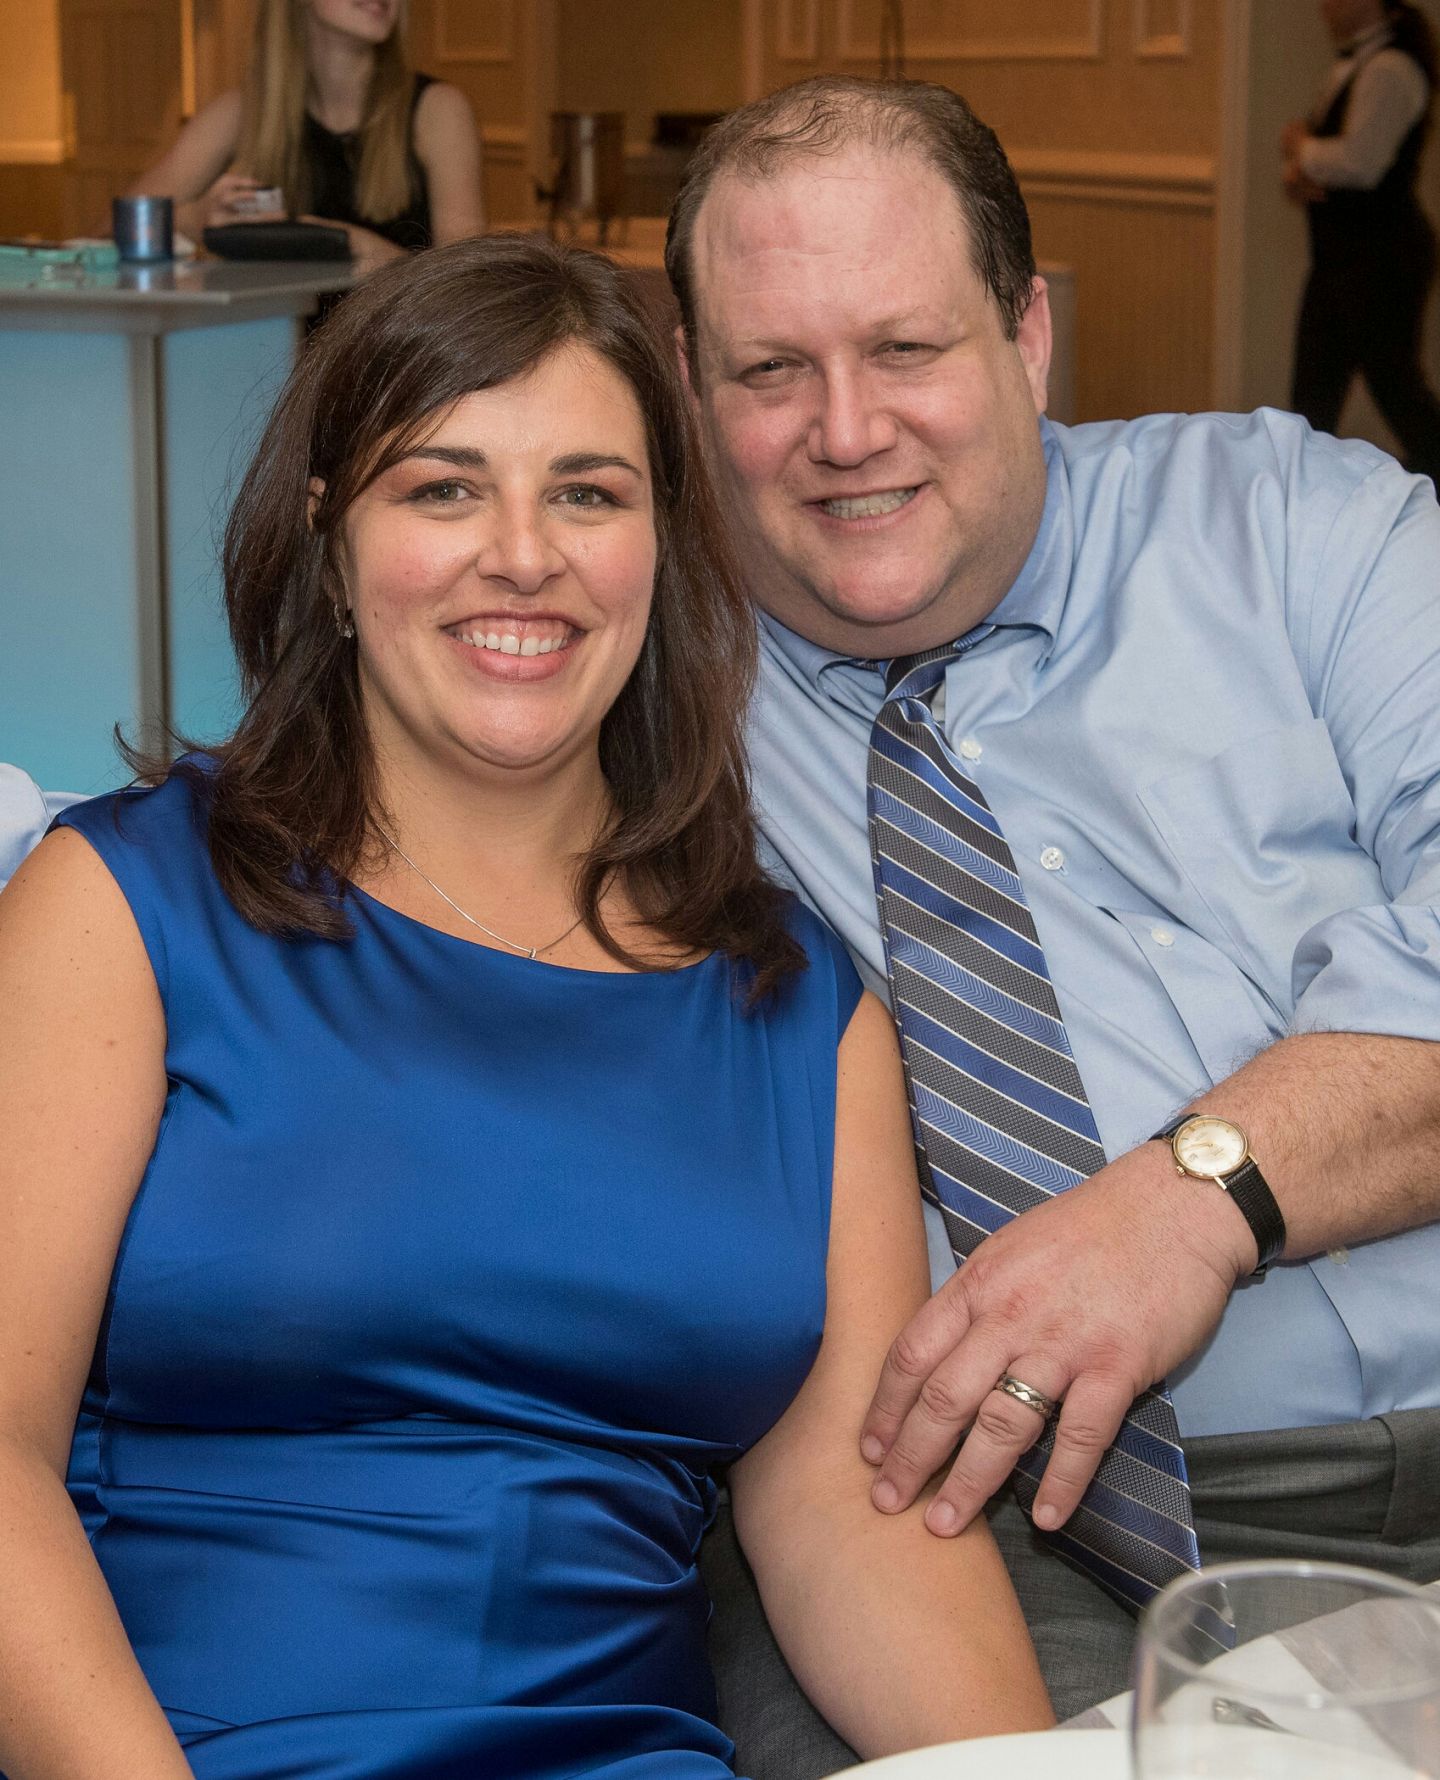 Suzanne and her husband who was a patient at NYU Langone and is now cancer free